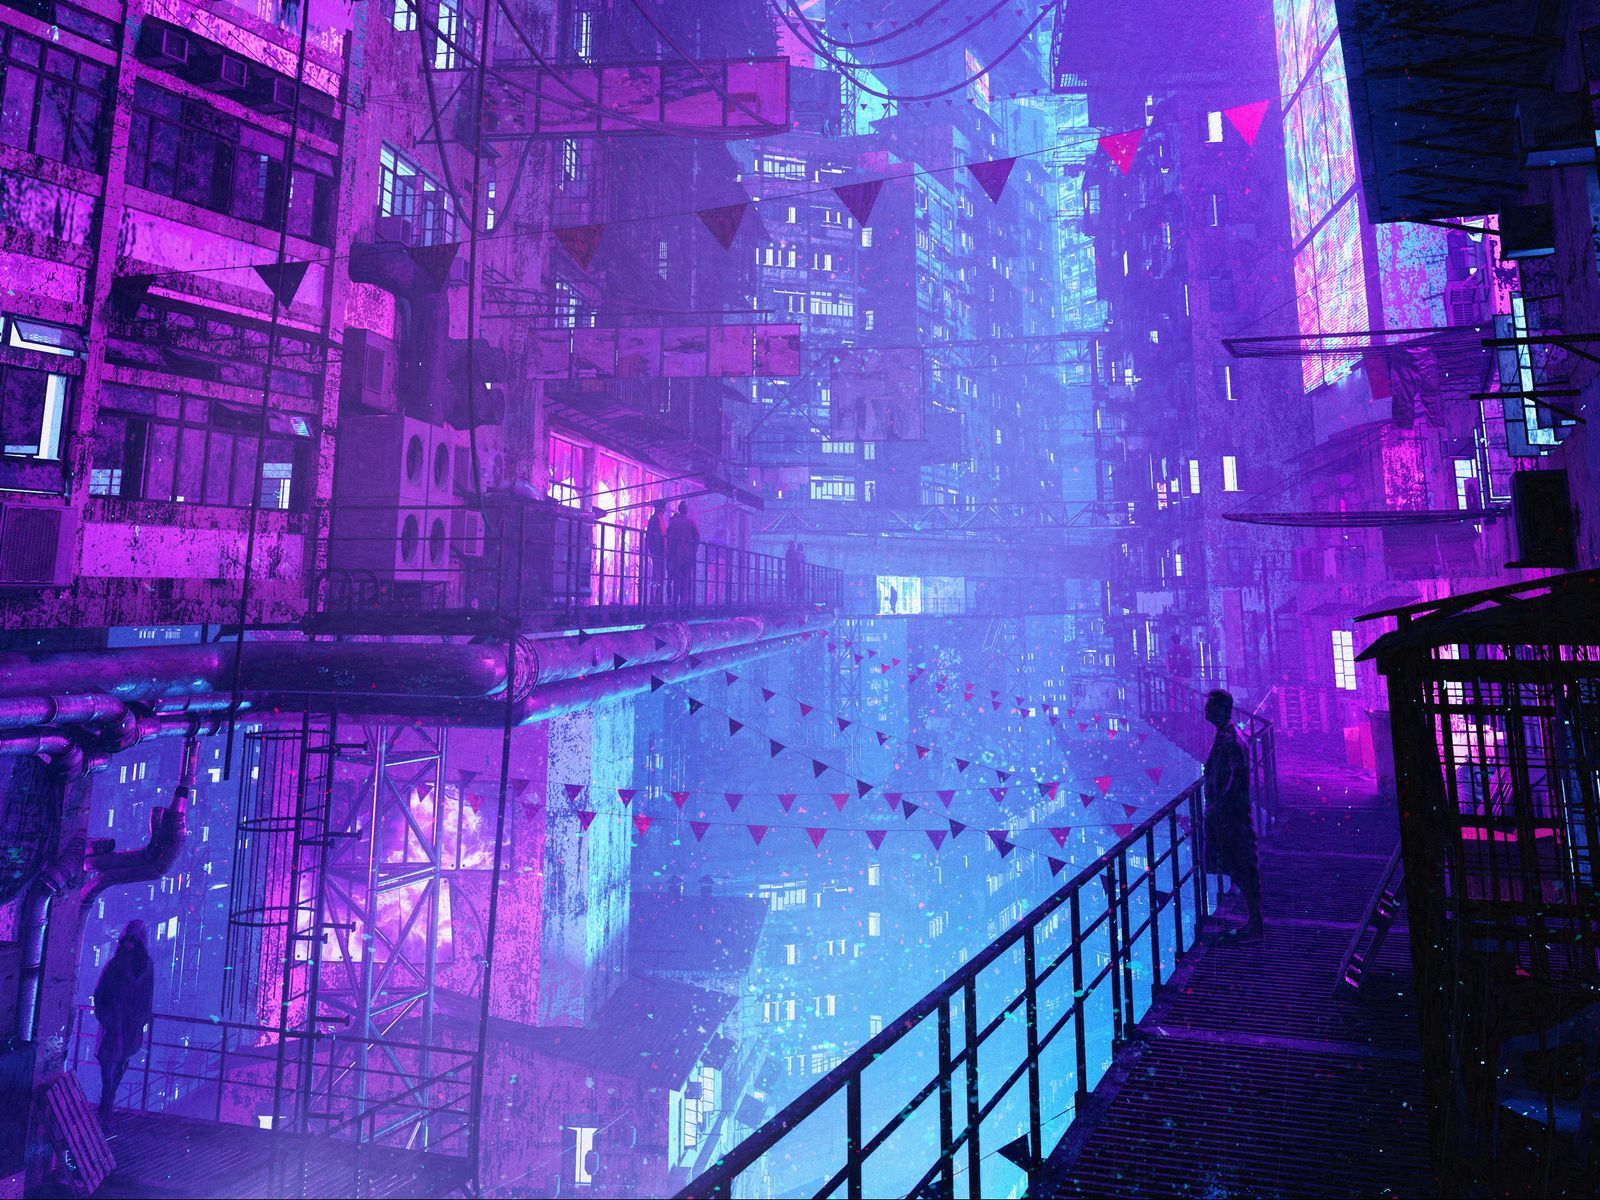 A cyberpunk city at night with purple and blue neon lights - City